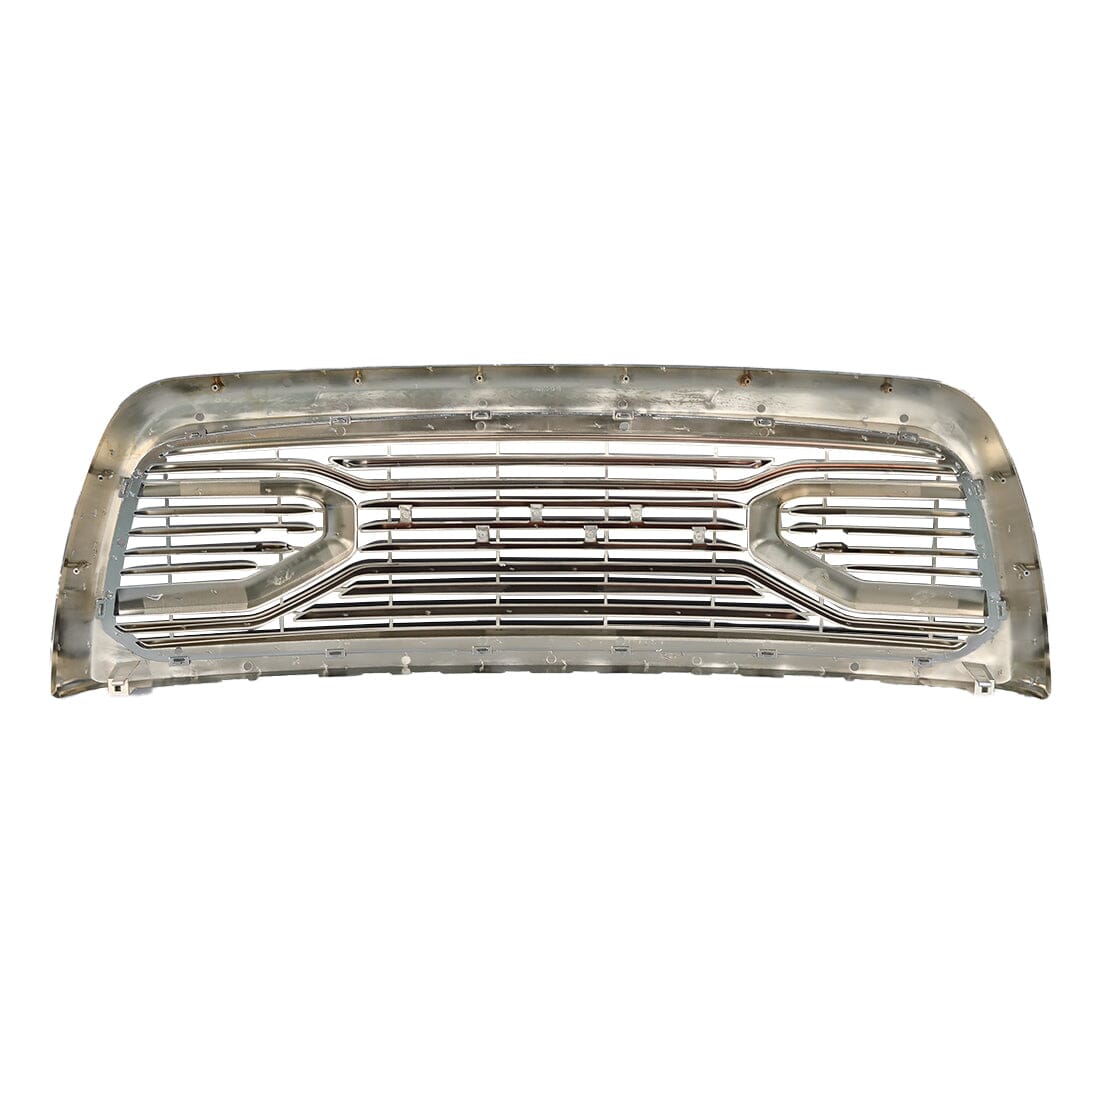 Chrome Big Horn Style Front Grille For 2010-2019 Dodge Ram 2500| Amoffroad